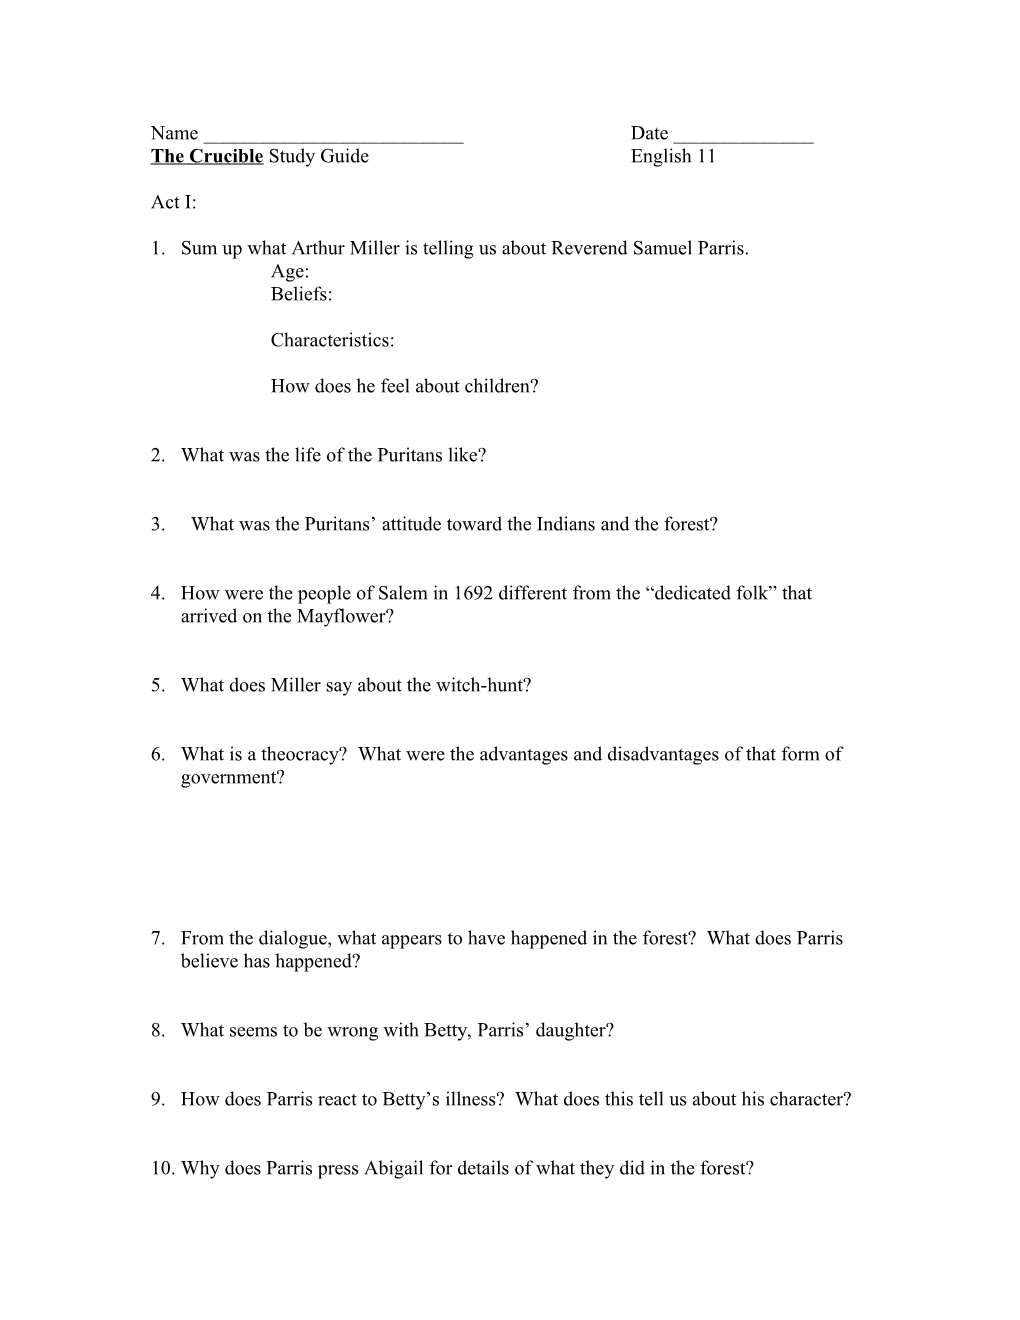 The Crucible Study Guide English 11